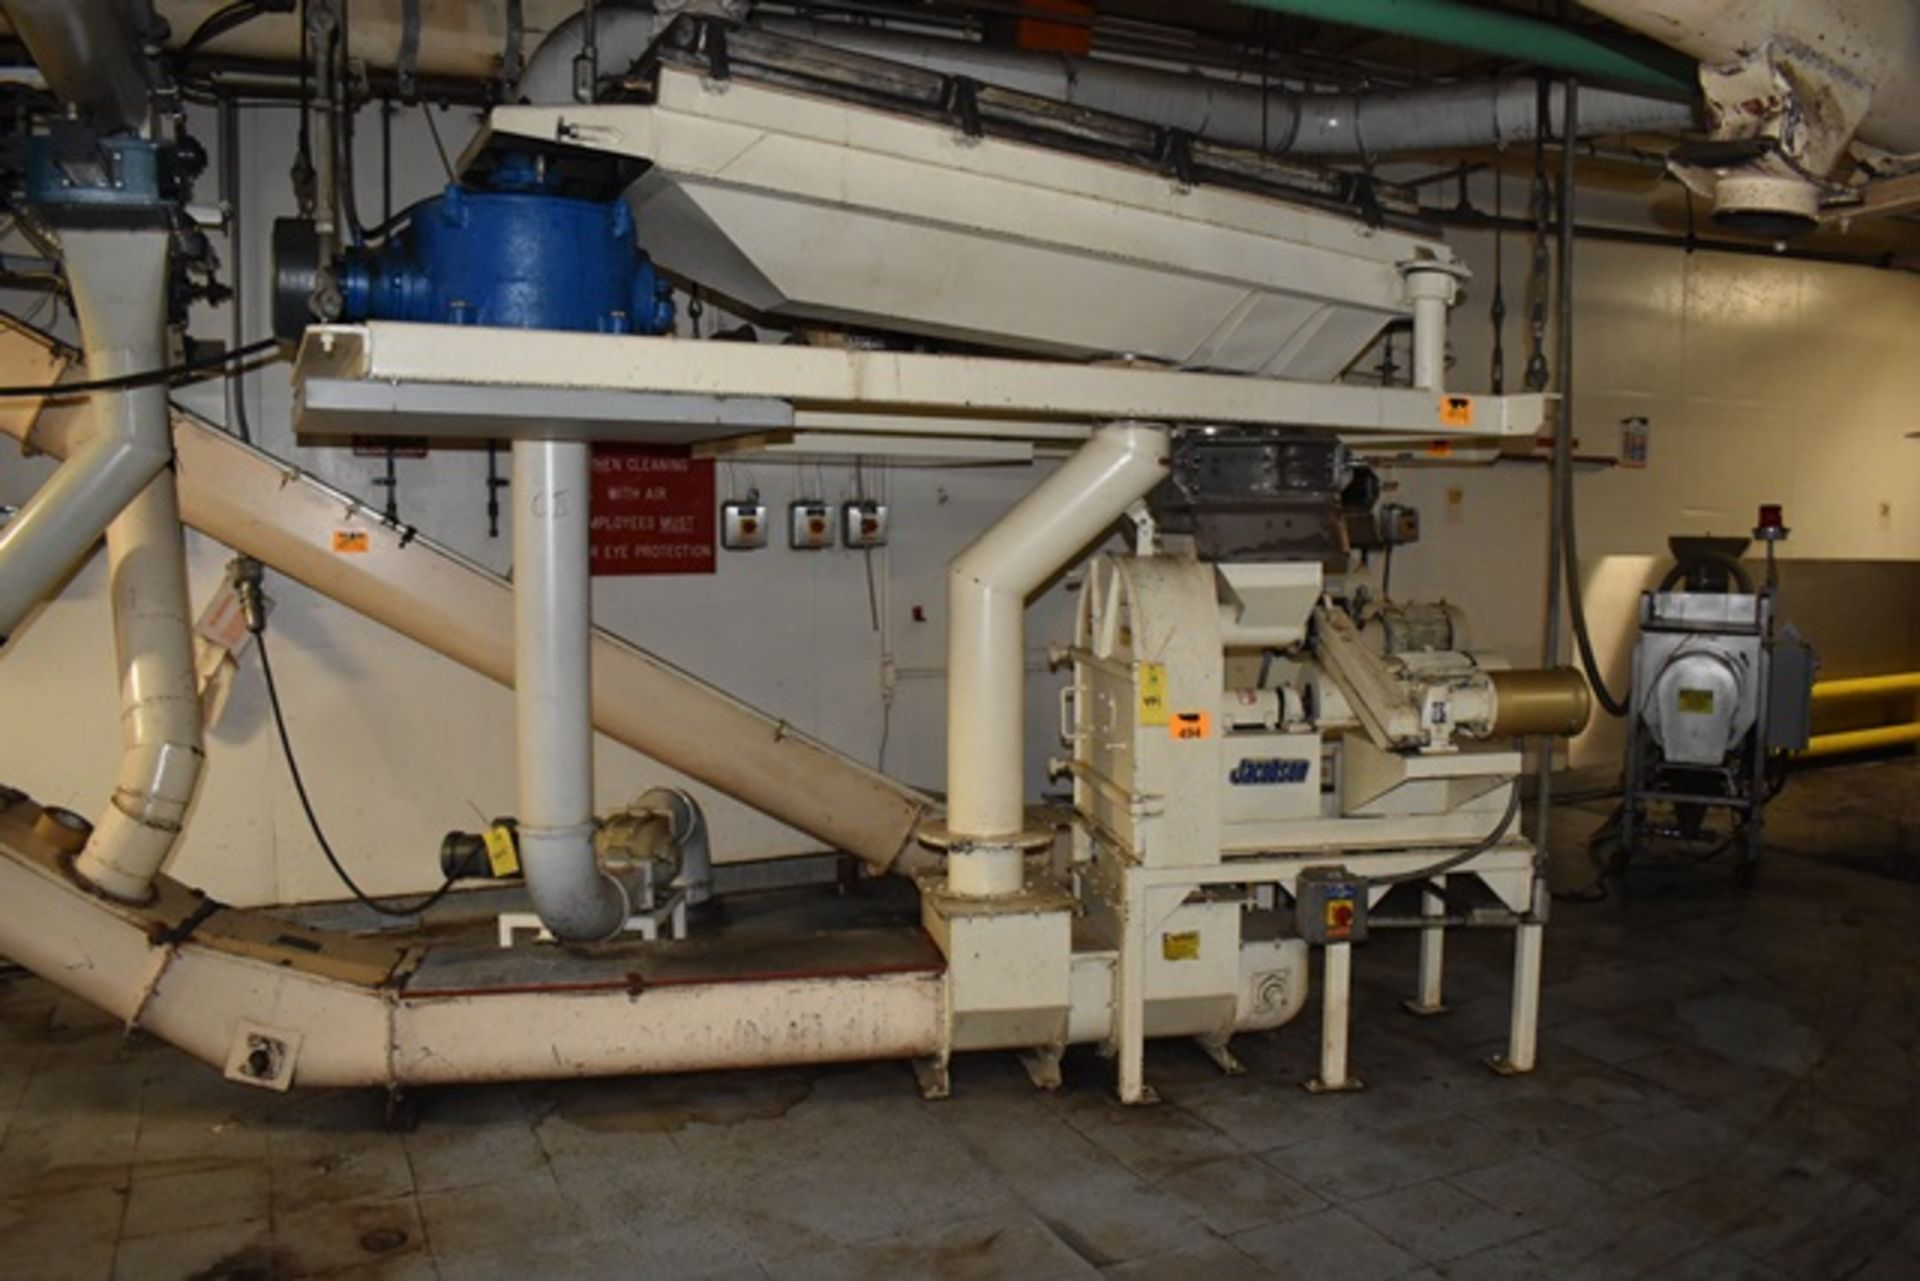 Jacobson hammermill, model P-160-DFF, s/n 3778, with 4" dia screw feeder, 10hp drive @ 9:95